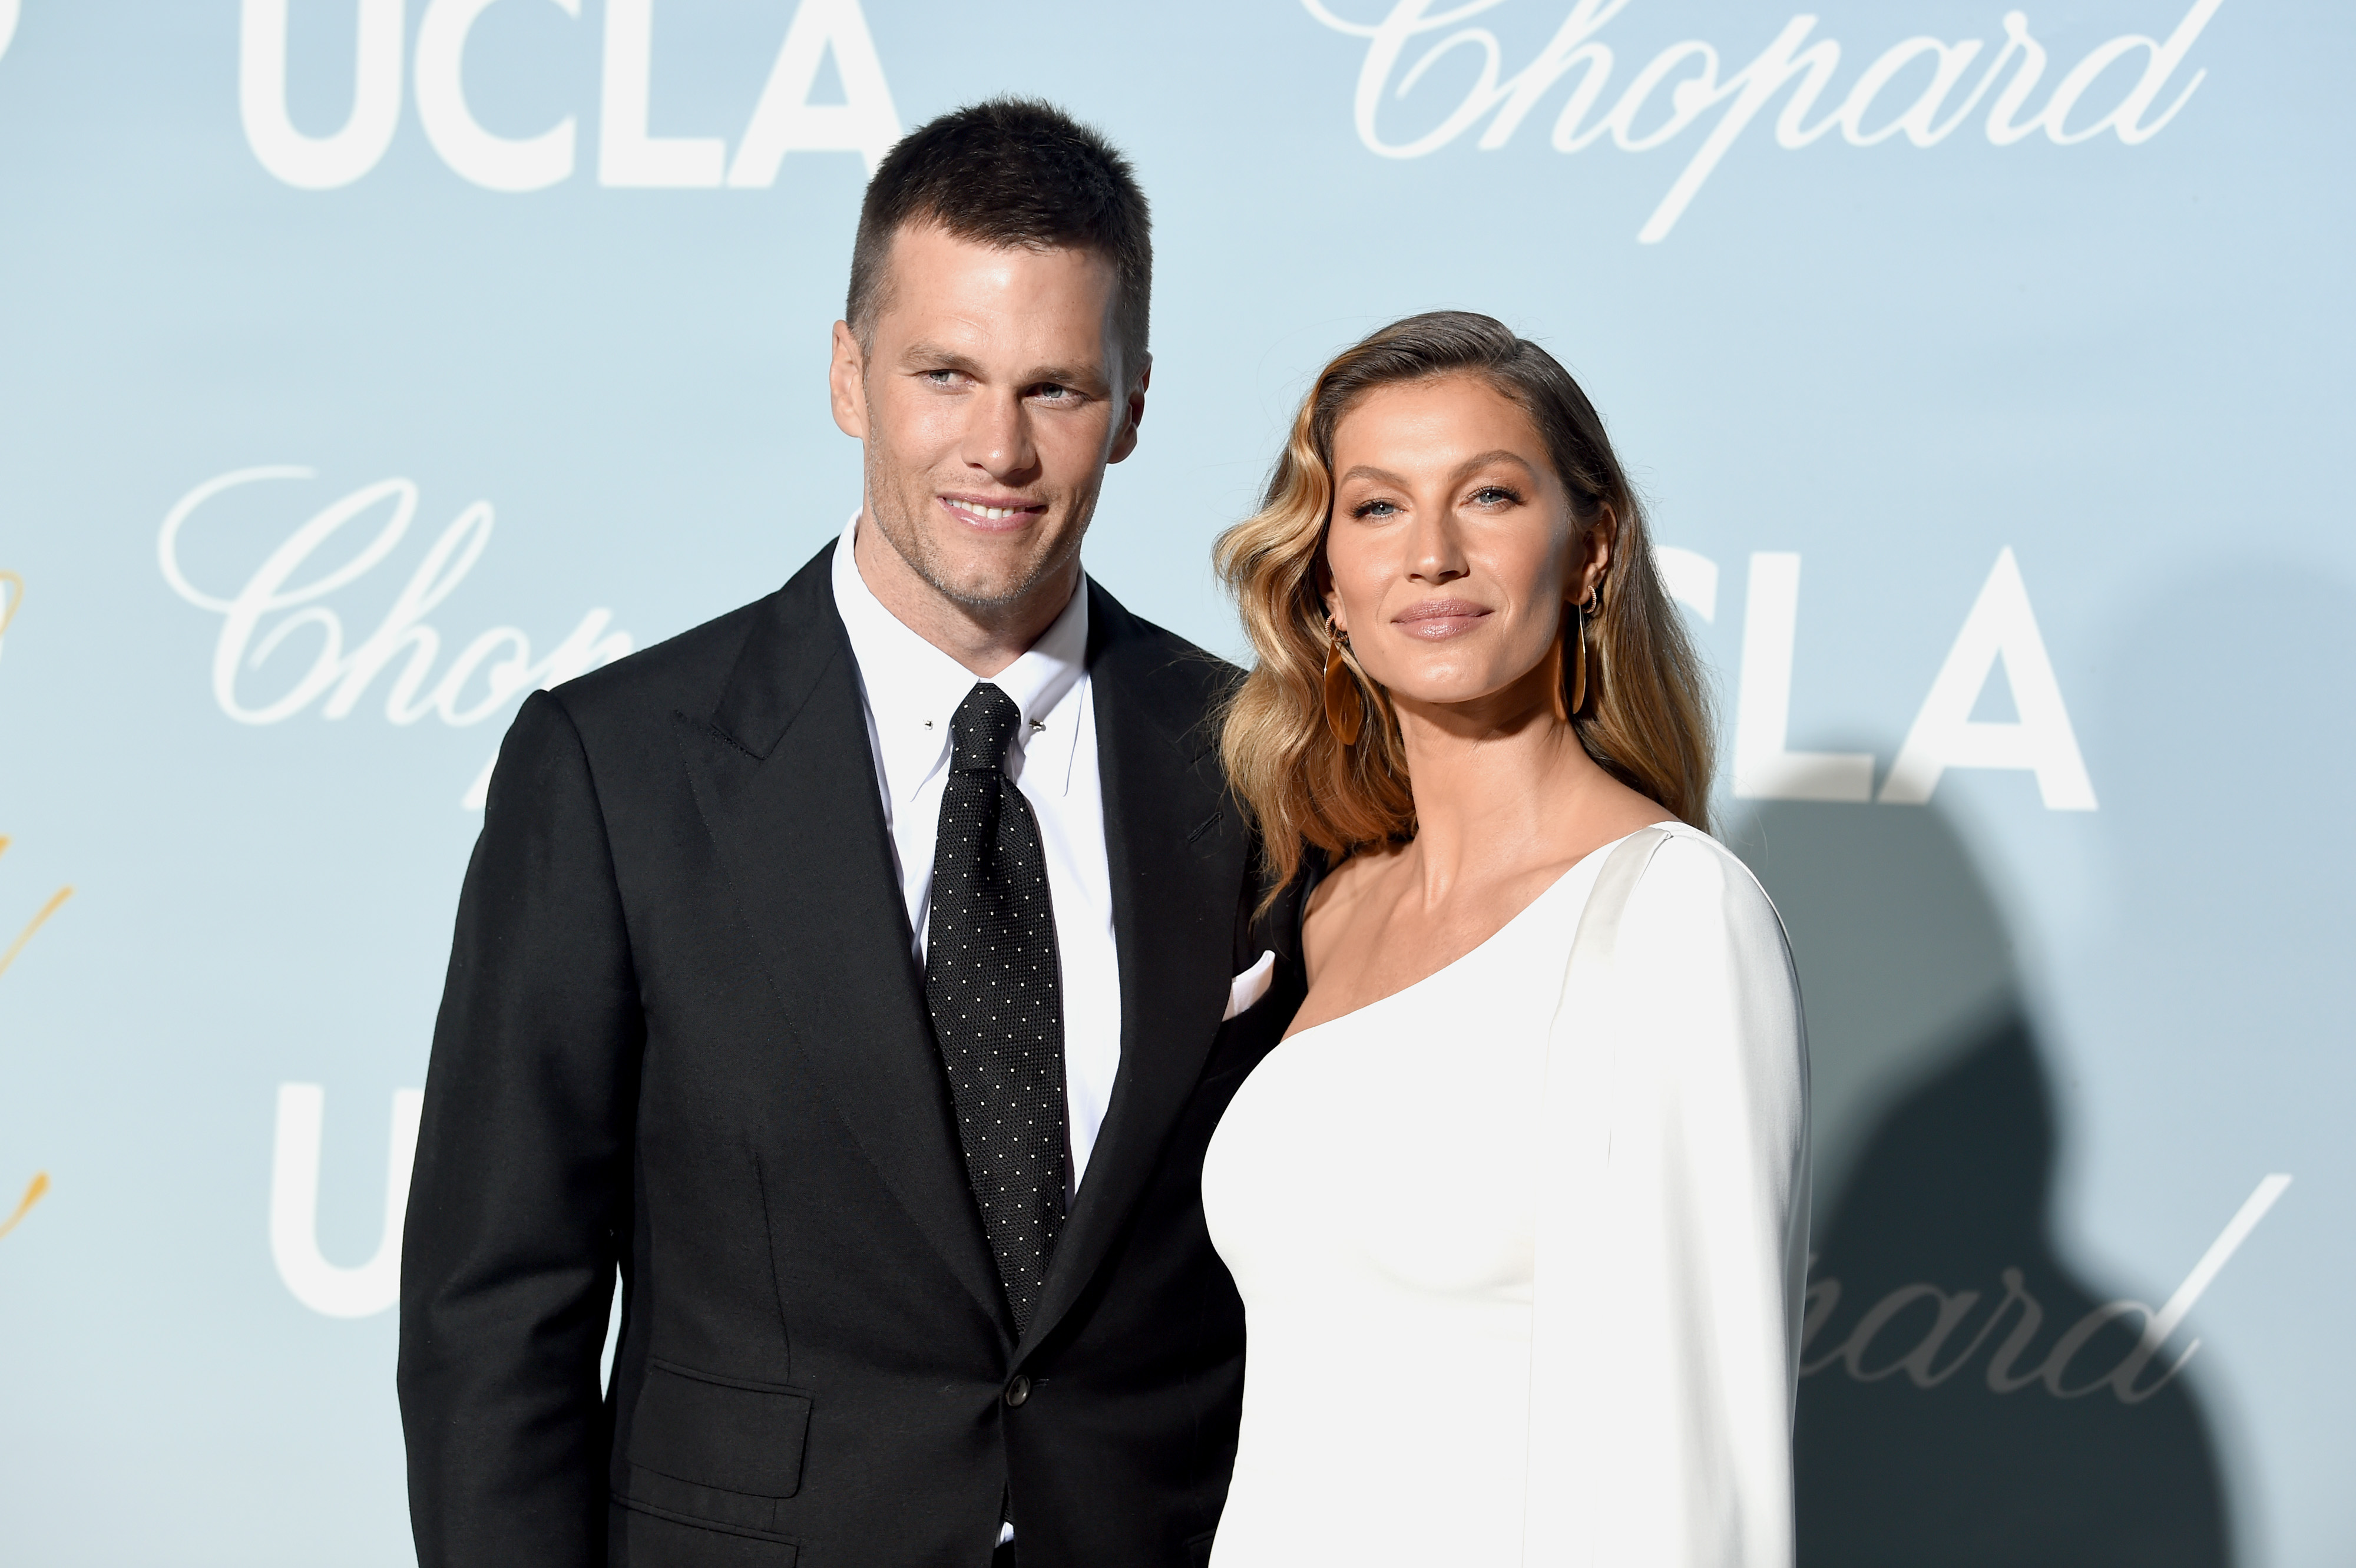 Tom Brady and Gisele Bündchen attends the 2019 Hollywood For Science Gala at Private Residence on February 21, 2019 in Los Angeles, California | Source: Getty Images